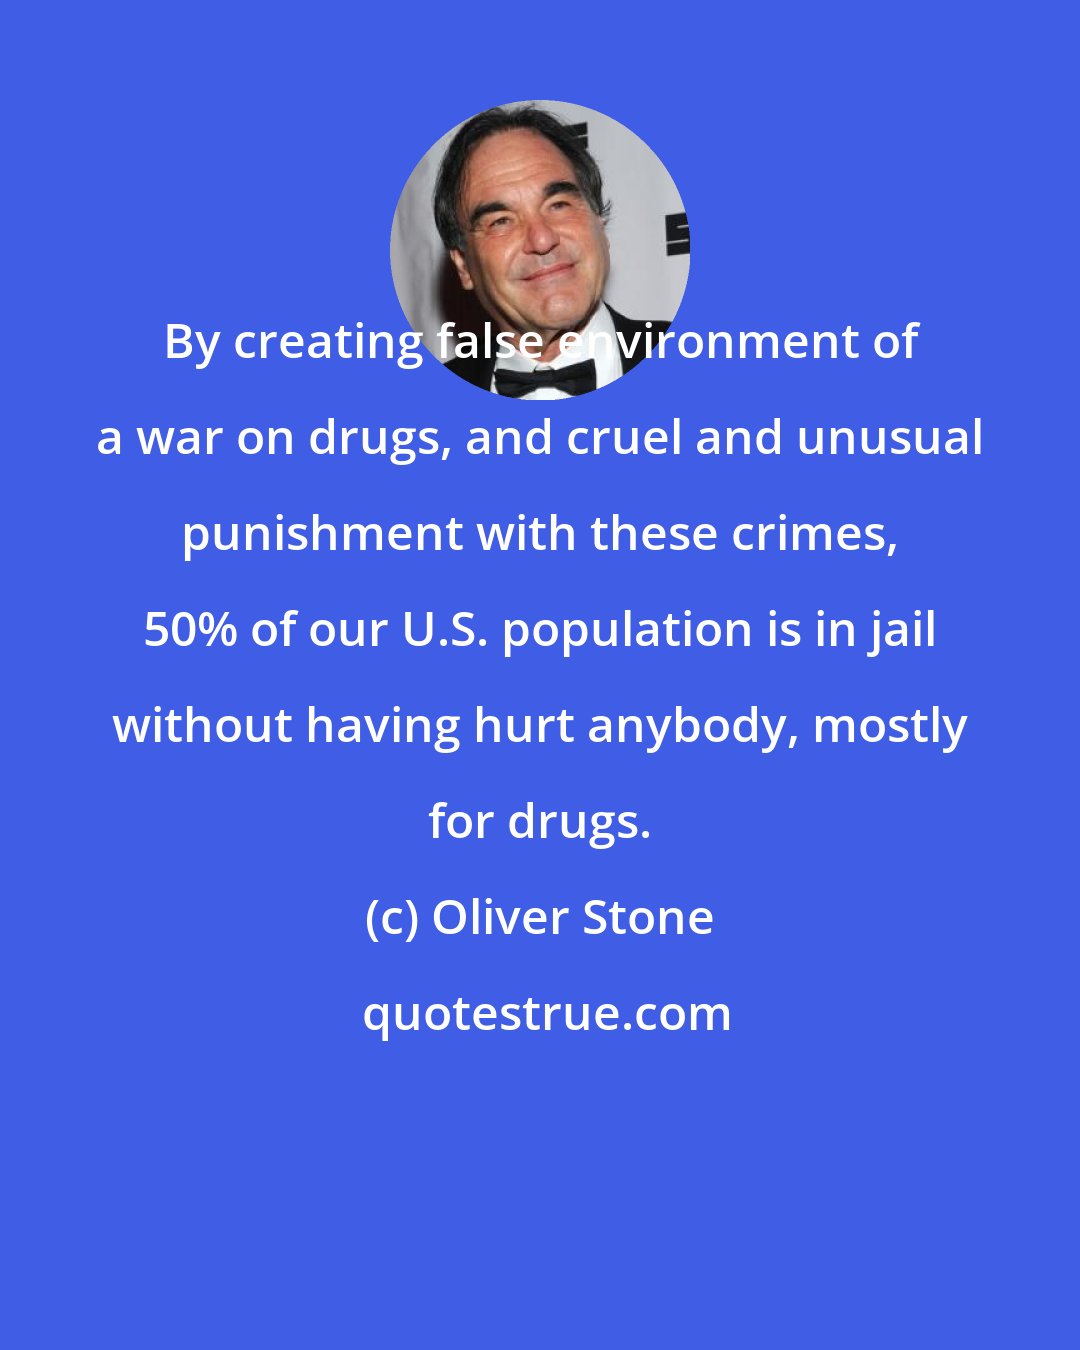 Oliver Stone: By creating false environment of a war on drugs, and cruel and unusual punishment with these crimes, 50% of our U.S. population is in jail without having hurt anybody, mostly for drugs.